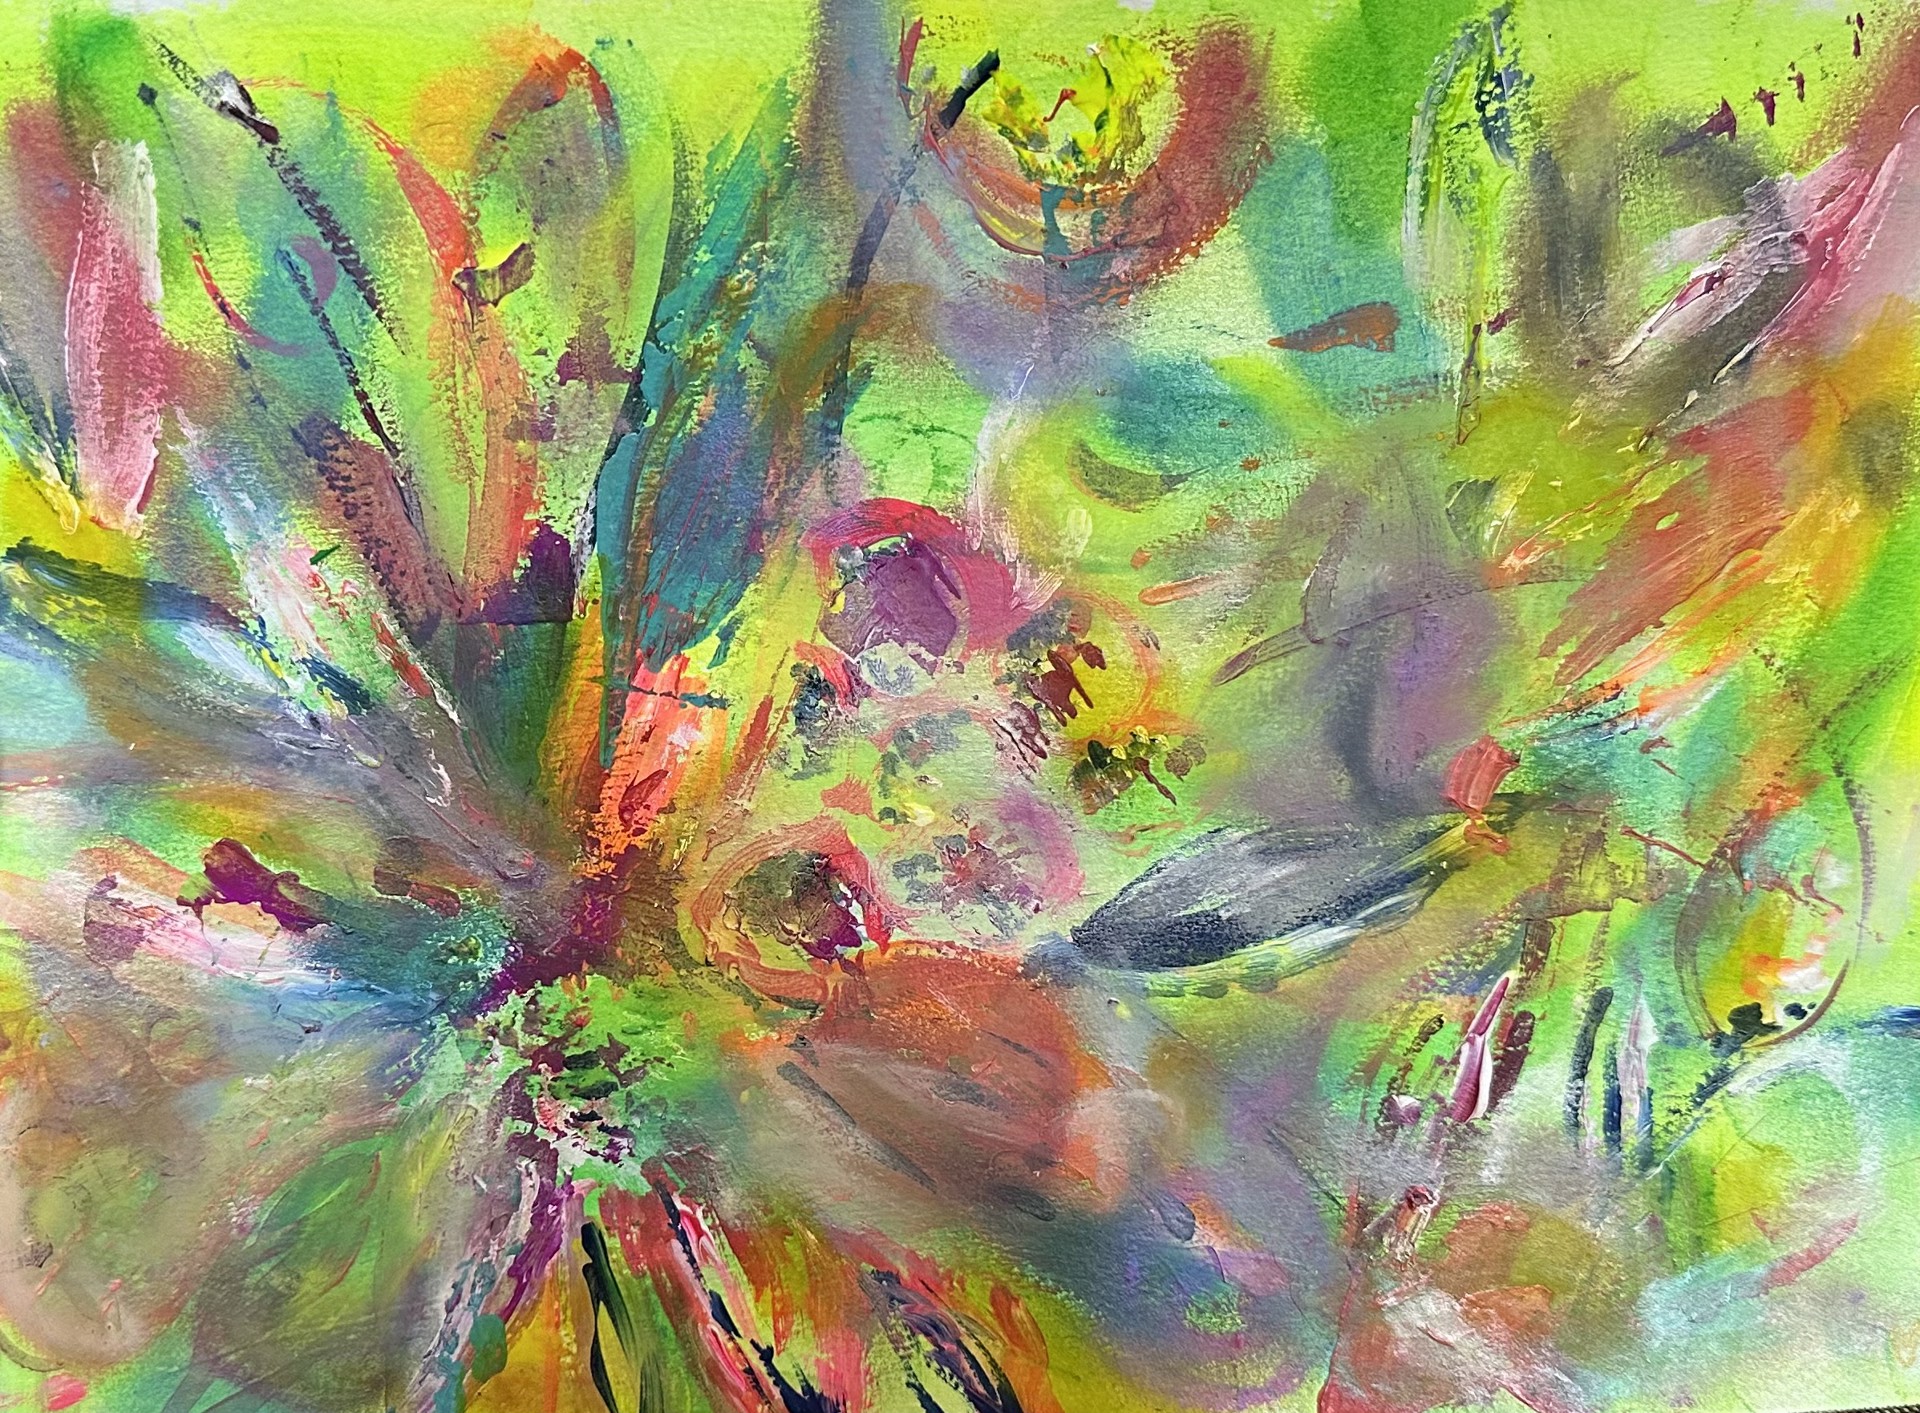 Floral Explosion, by Jess Renard by Visiting Artists